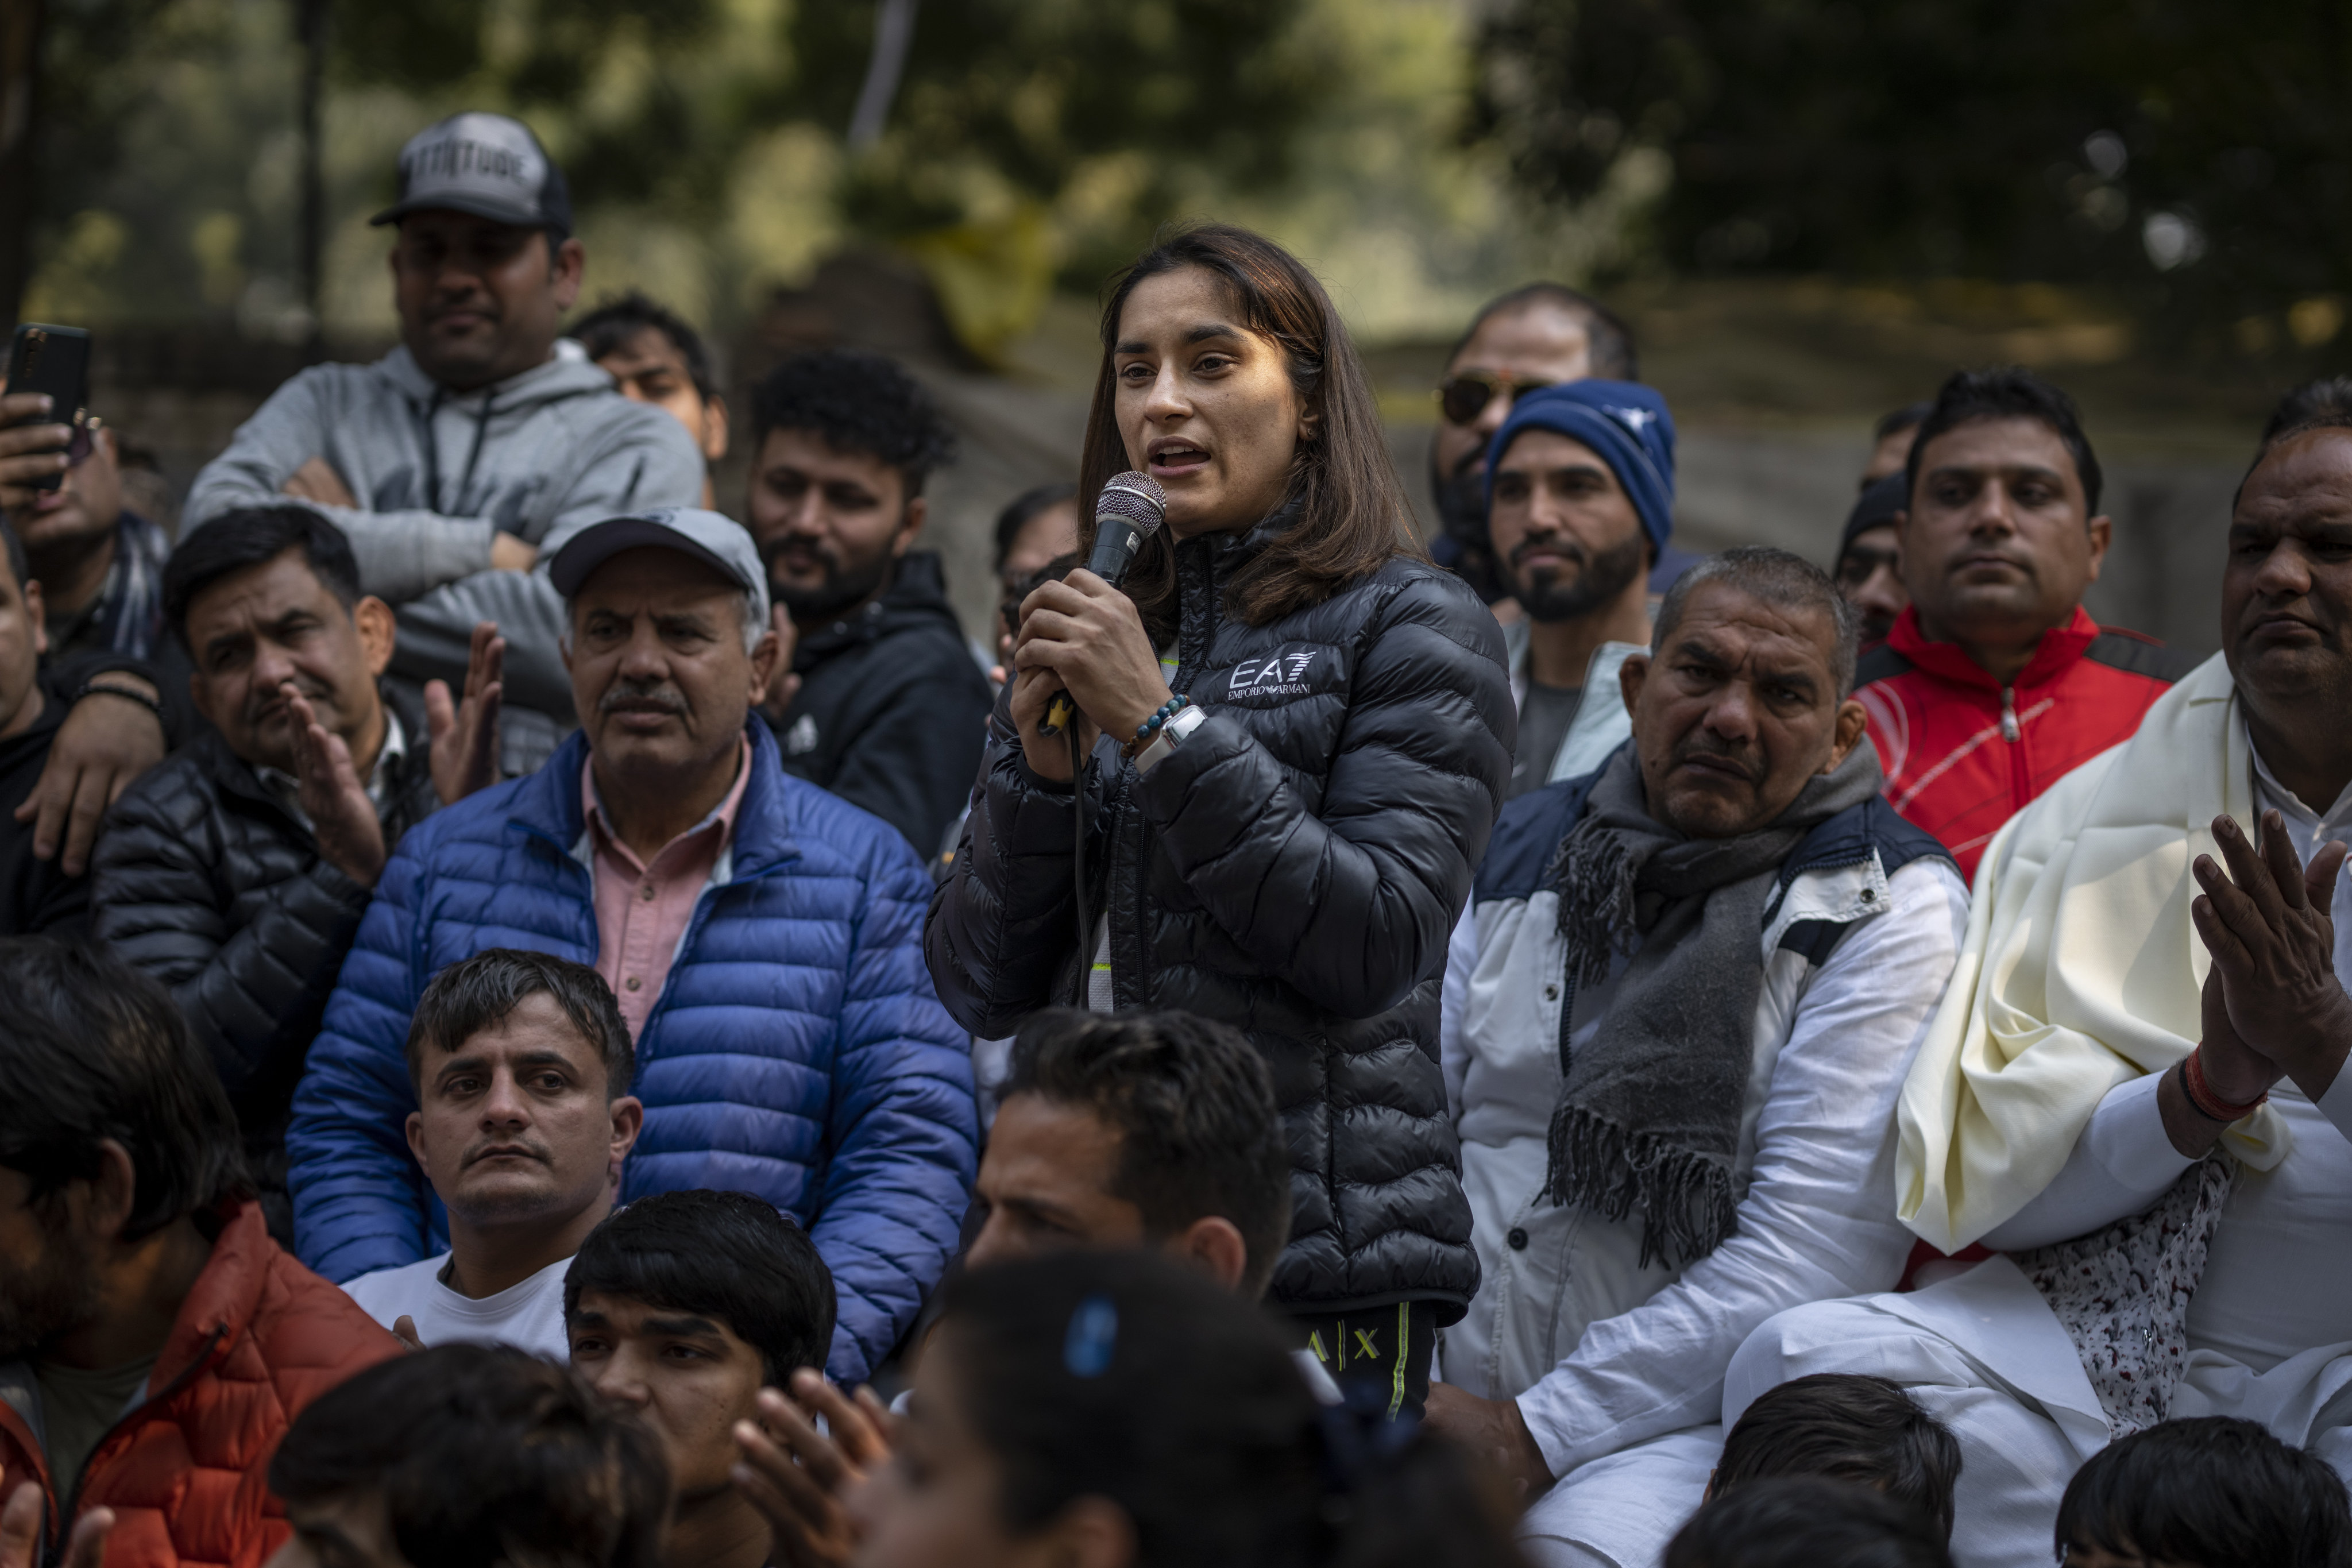 Indian wrestler Vinesh Phogat speaks during the protest on January 19, 2023. Top India wrestlers led a sit-in protest near the parliament building accusing the federation president and coaches of sexually and mentally harassing young wrestlers. Photo: AP